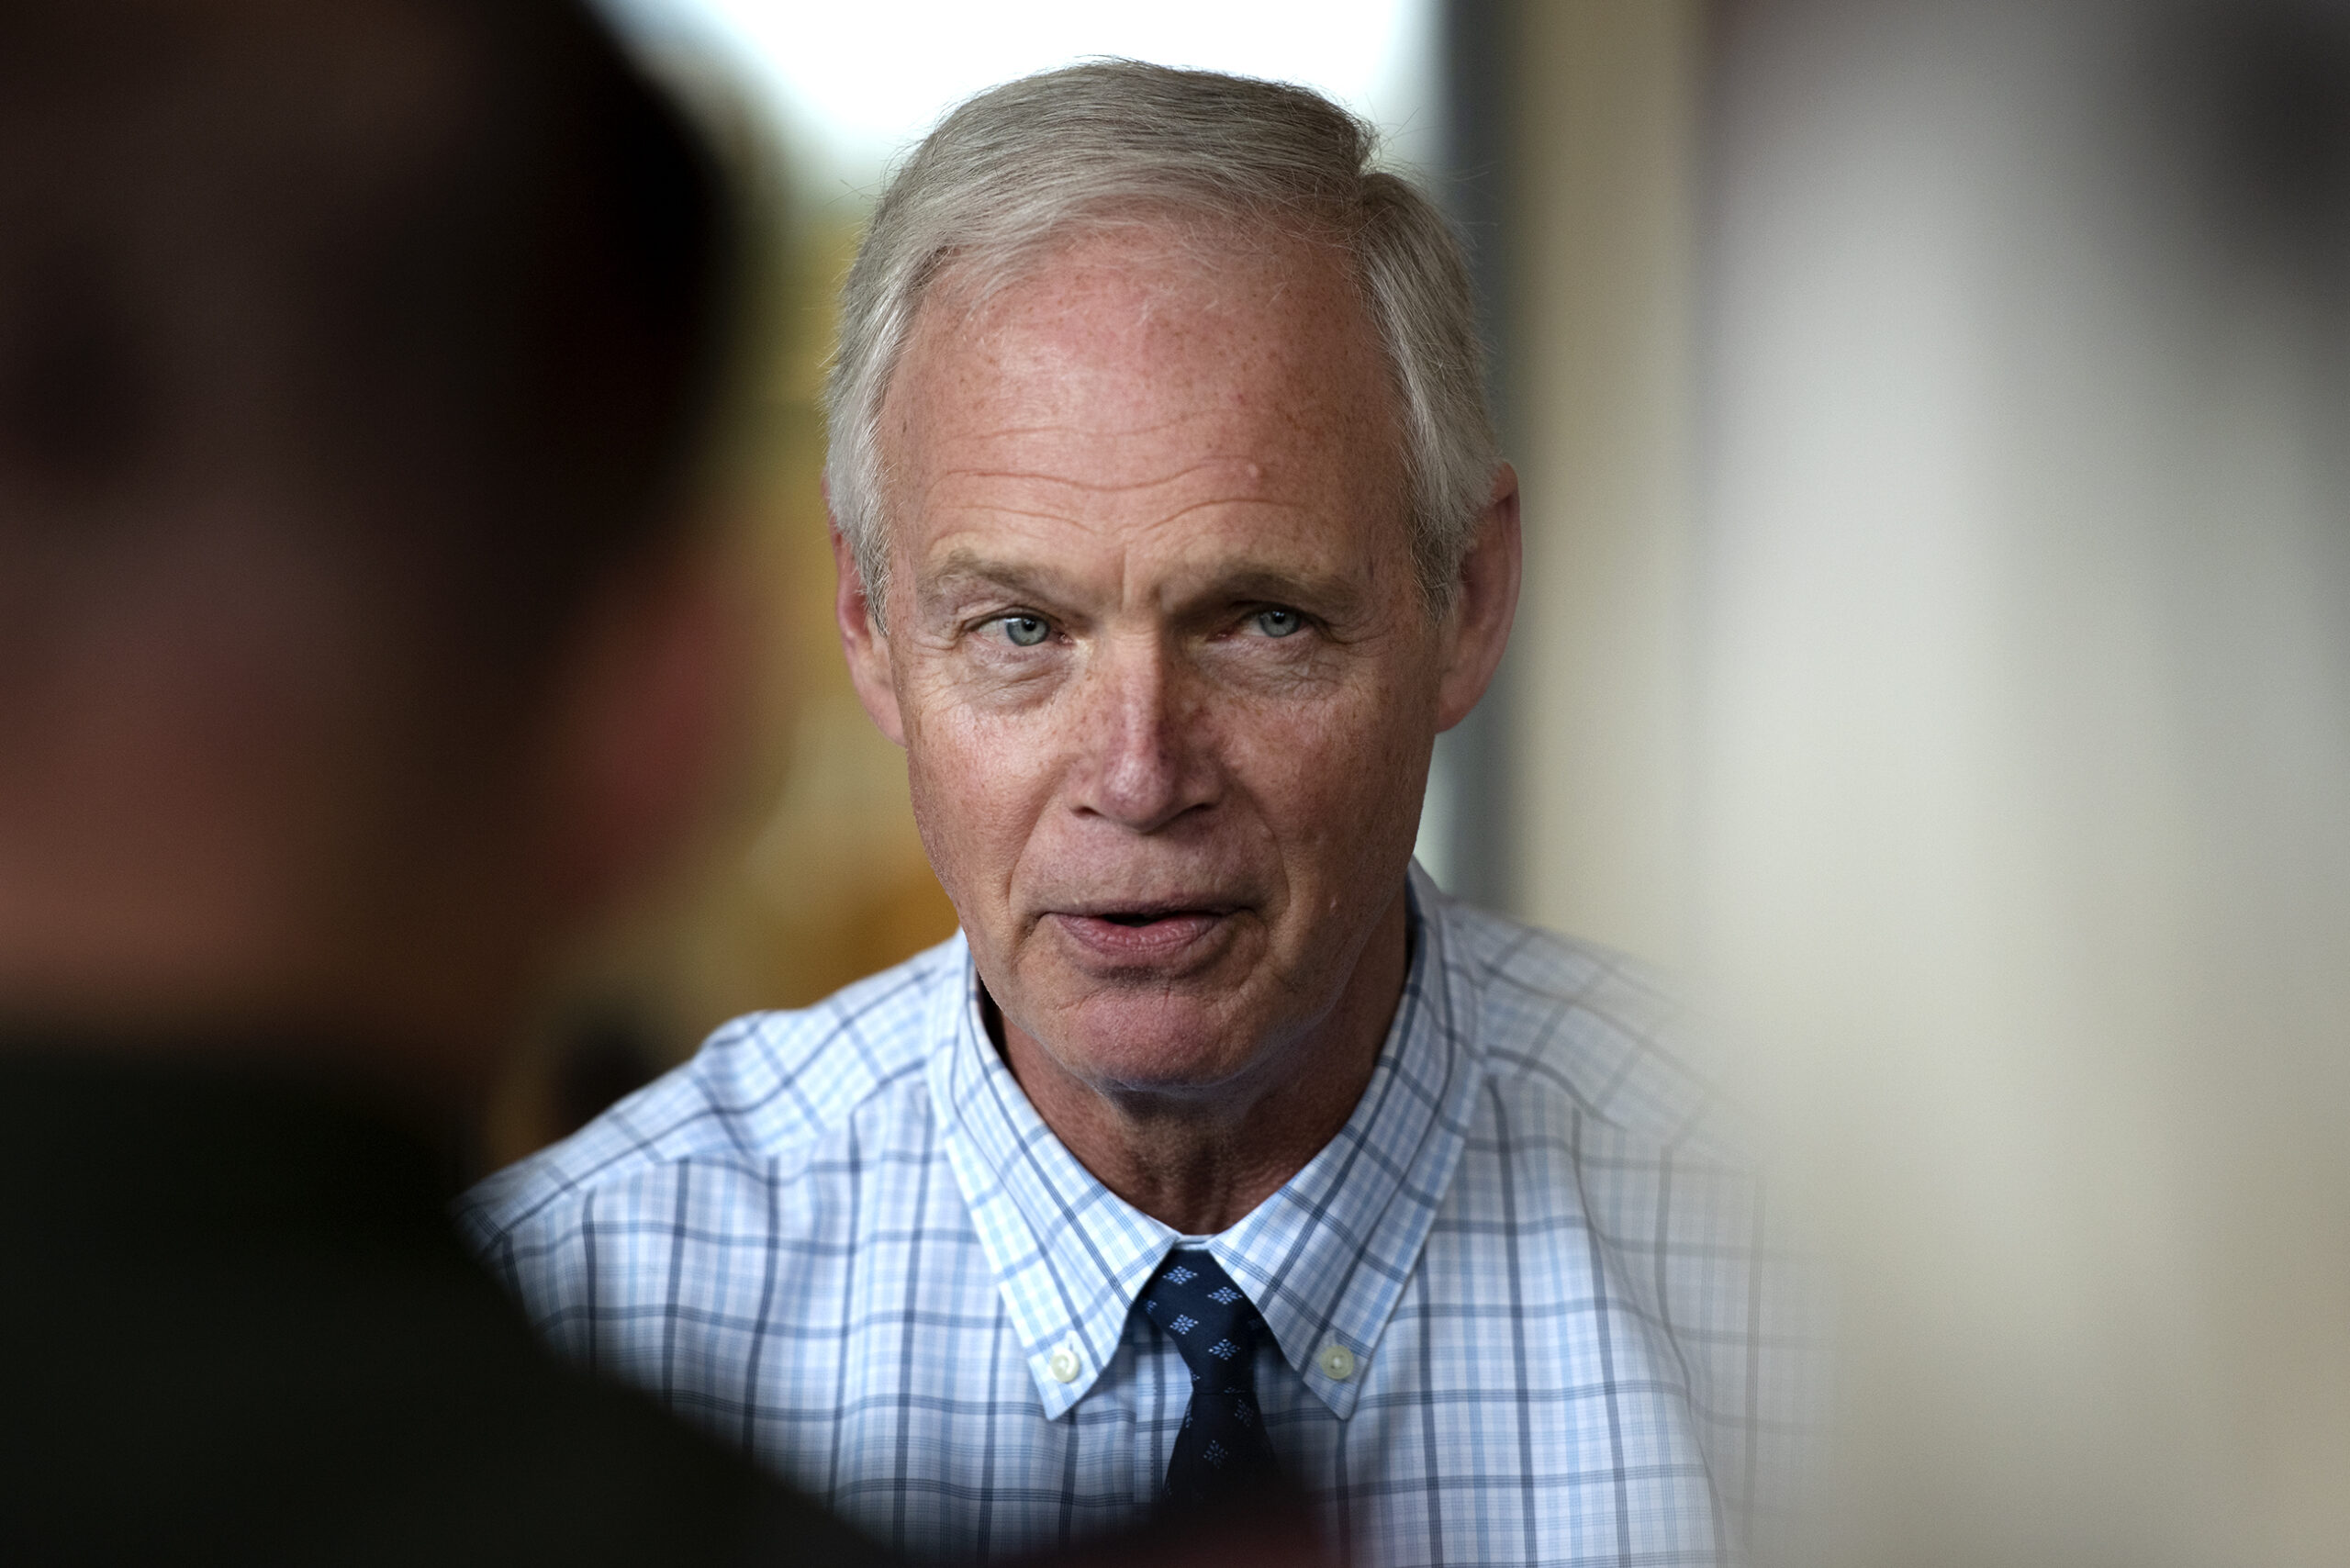 Sen. Ron Johnson is seen between people crowded to listen to him answer questions.